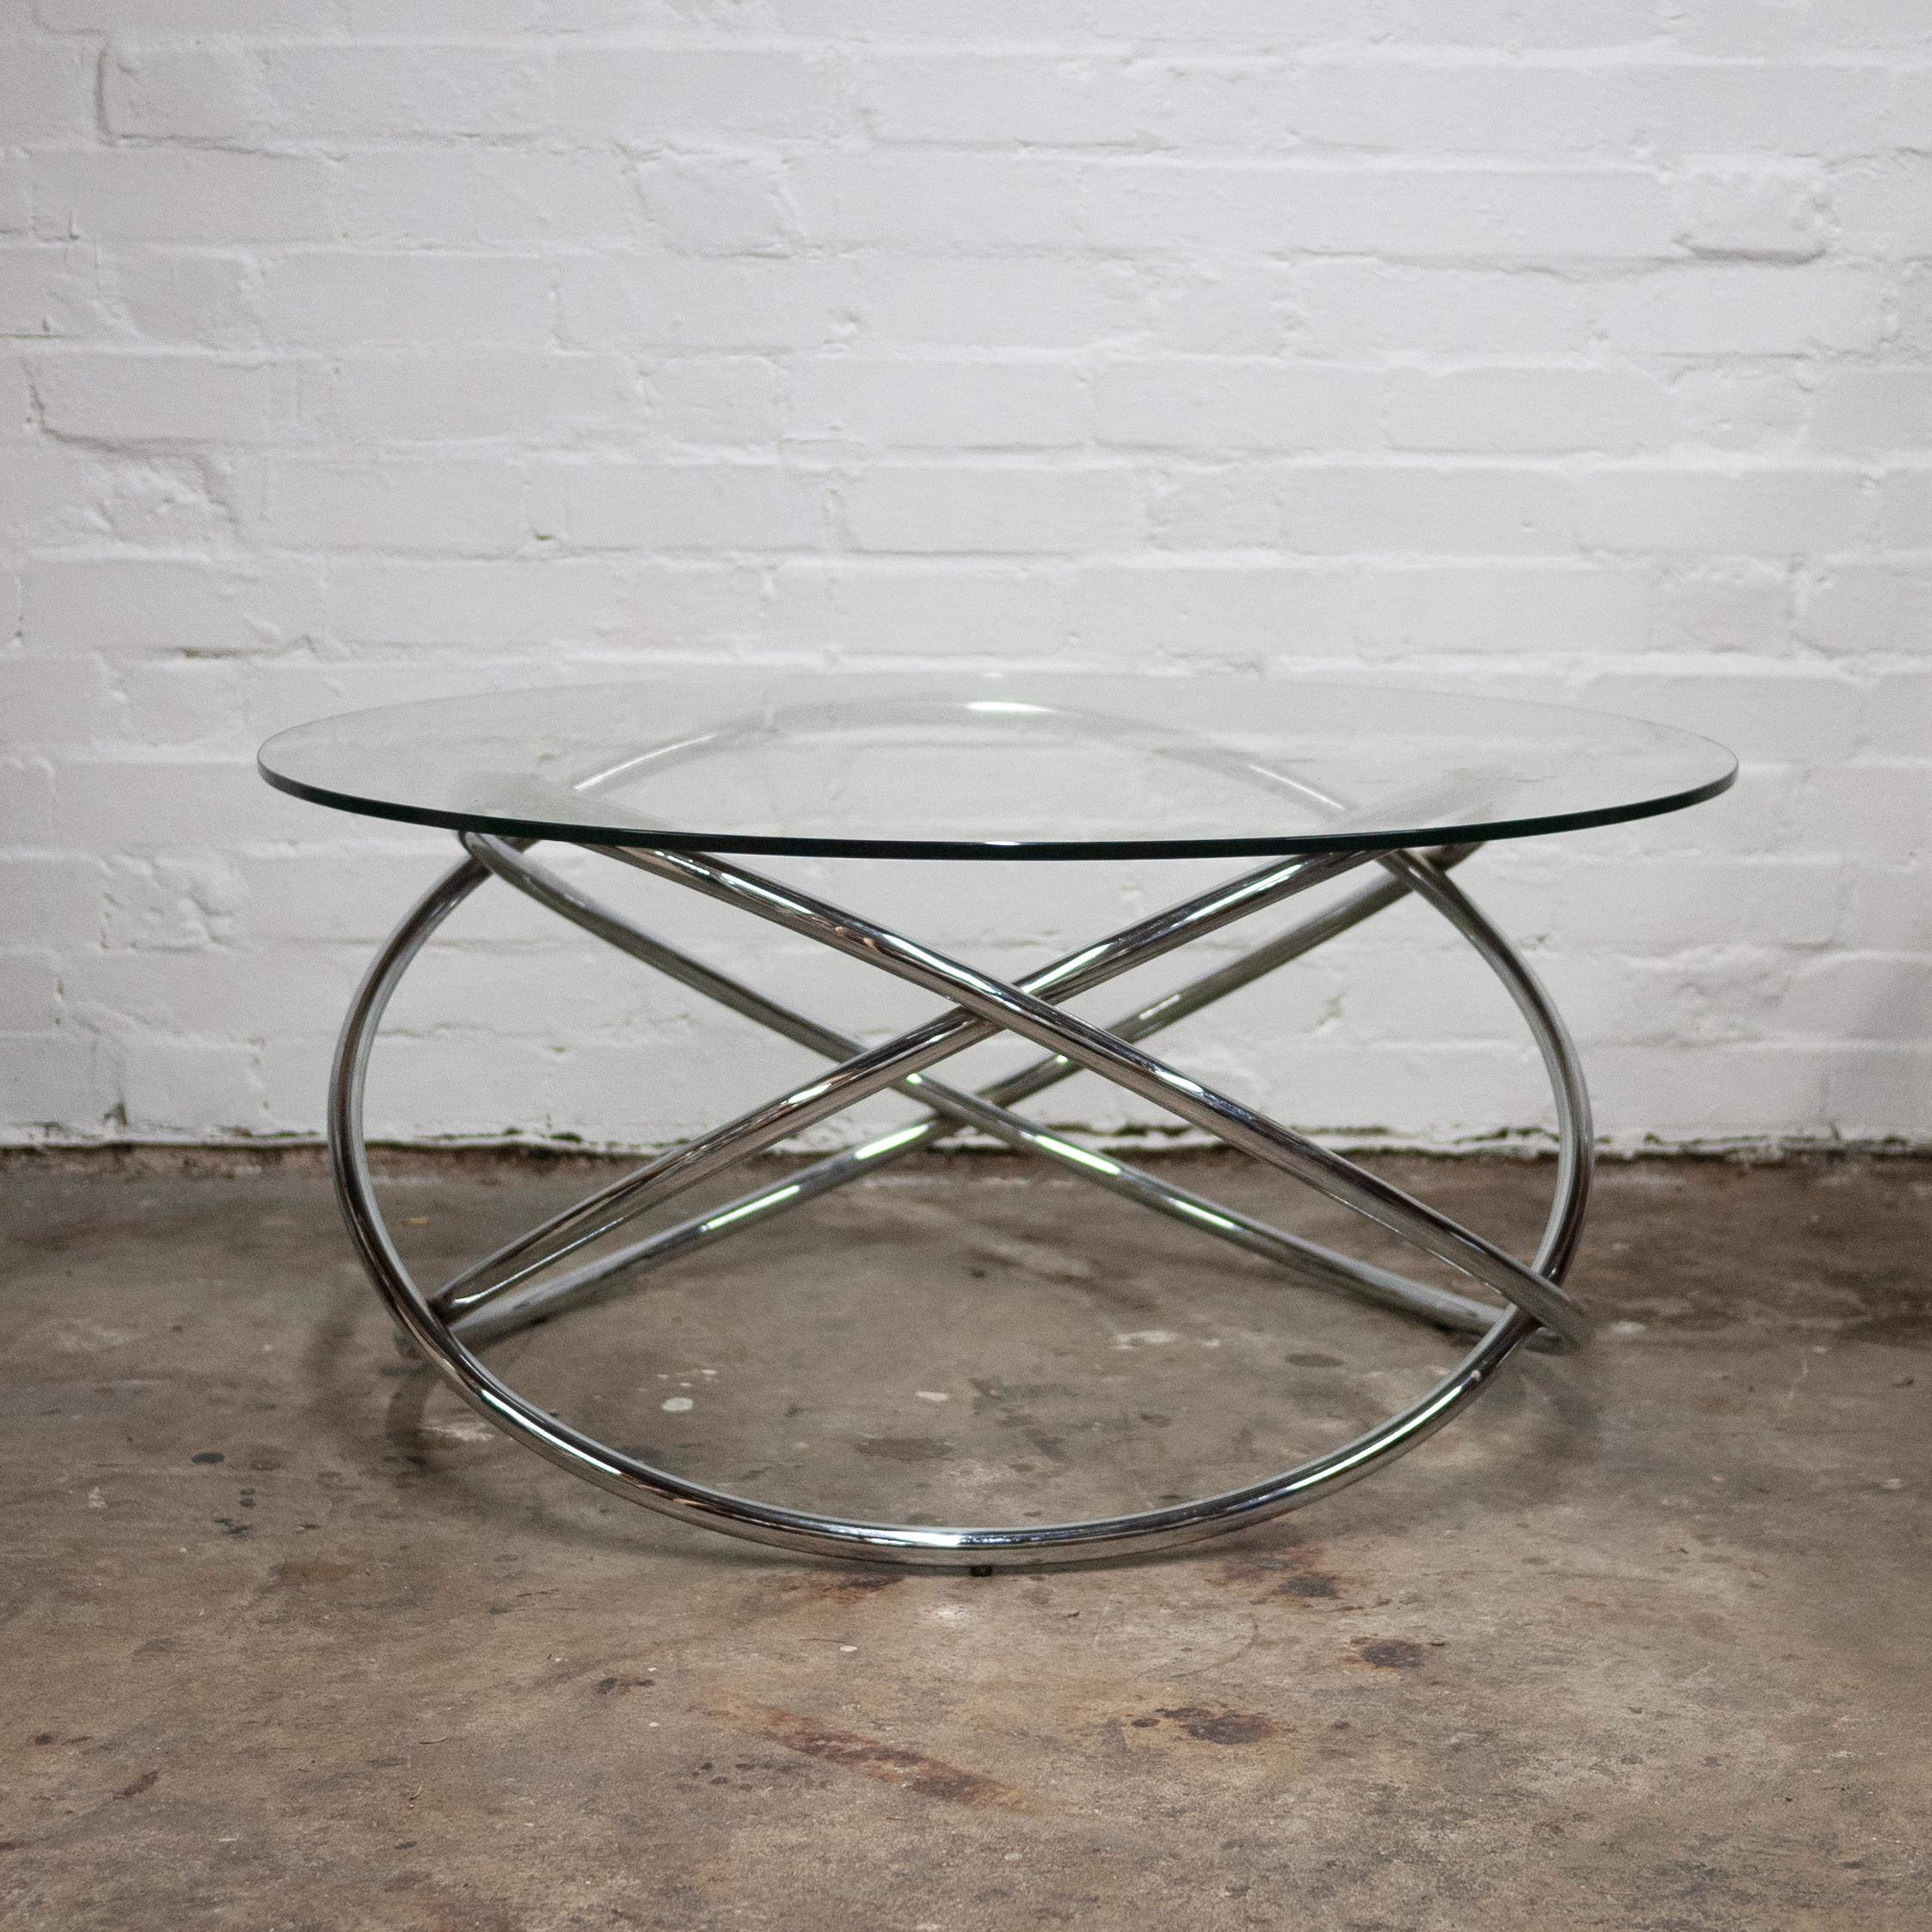 Vintage Italian Space Age Glass and Chrome Spiral Base Coffee Table, 1970s In Good Condition For Sale In Chesham, GB